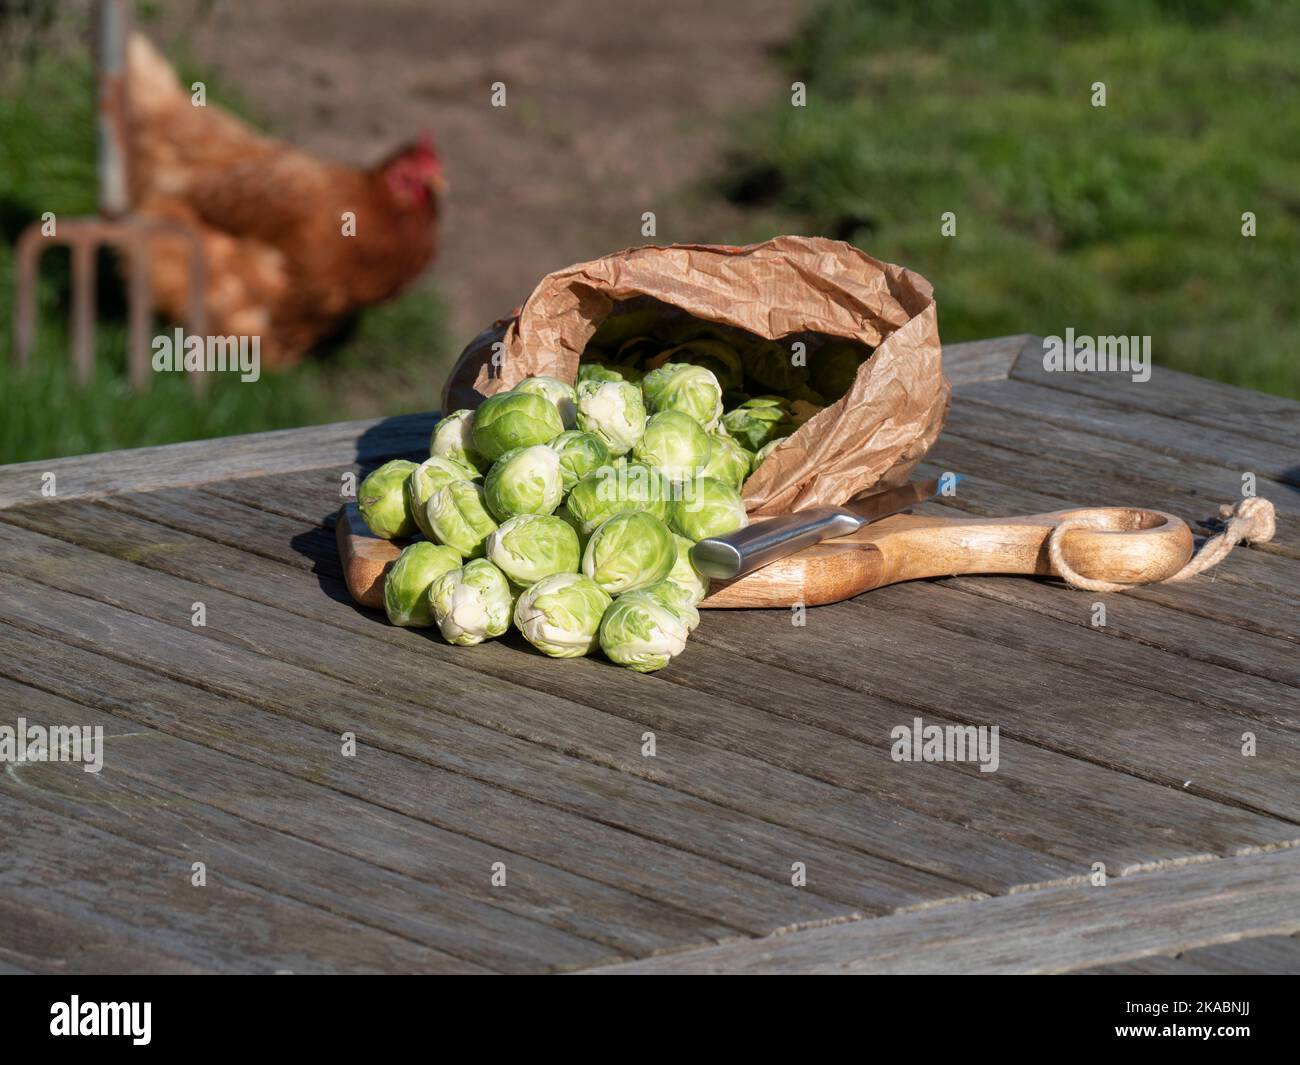 Brussels sprouts roll out of a brown paper bag on a wooden cutting board in the blurred background a chicken appears Stock Photo